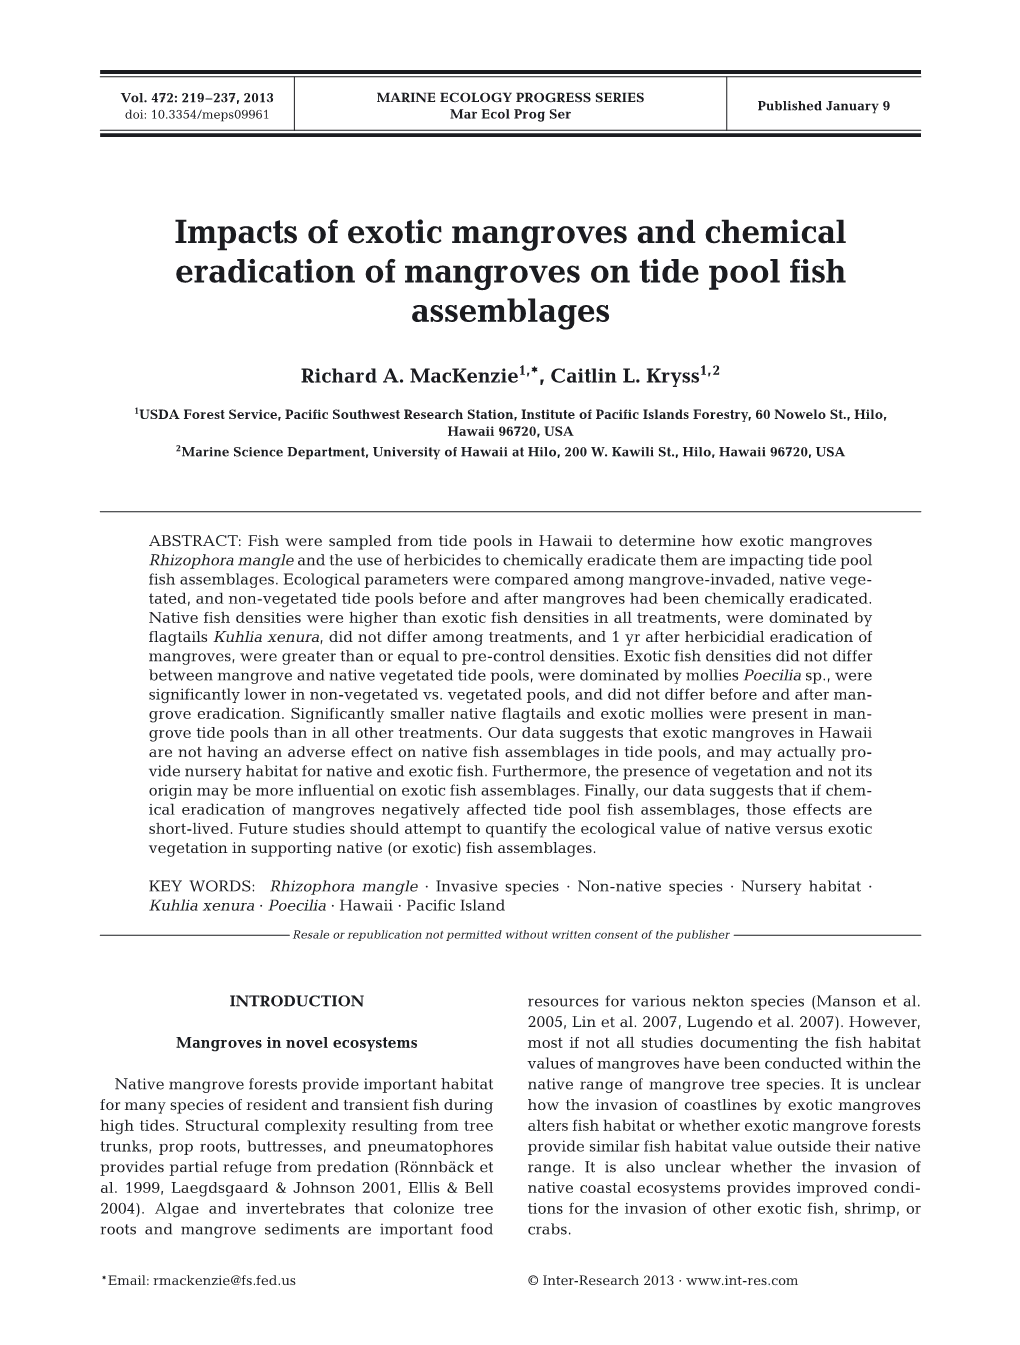 Impacts of Exotic Mangroves and Chemical Eradication of Mangroves on Tide Pool Fish Assemblages